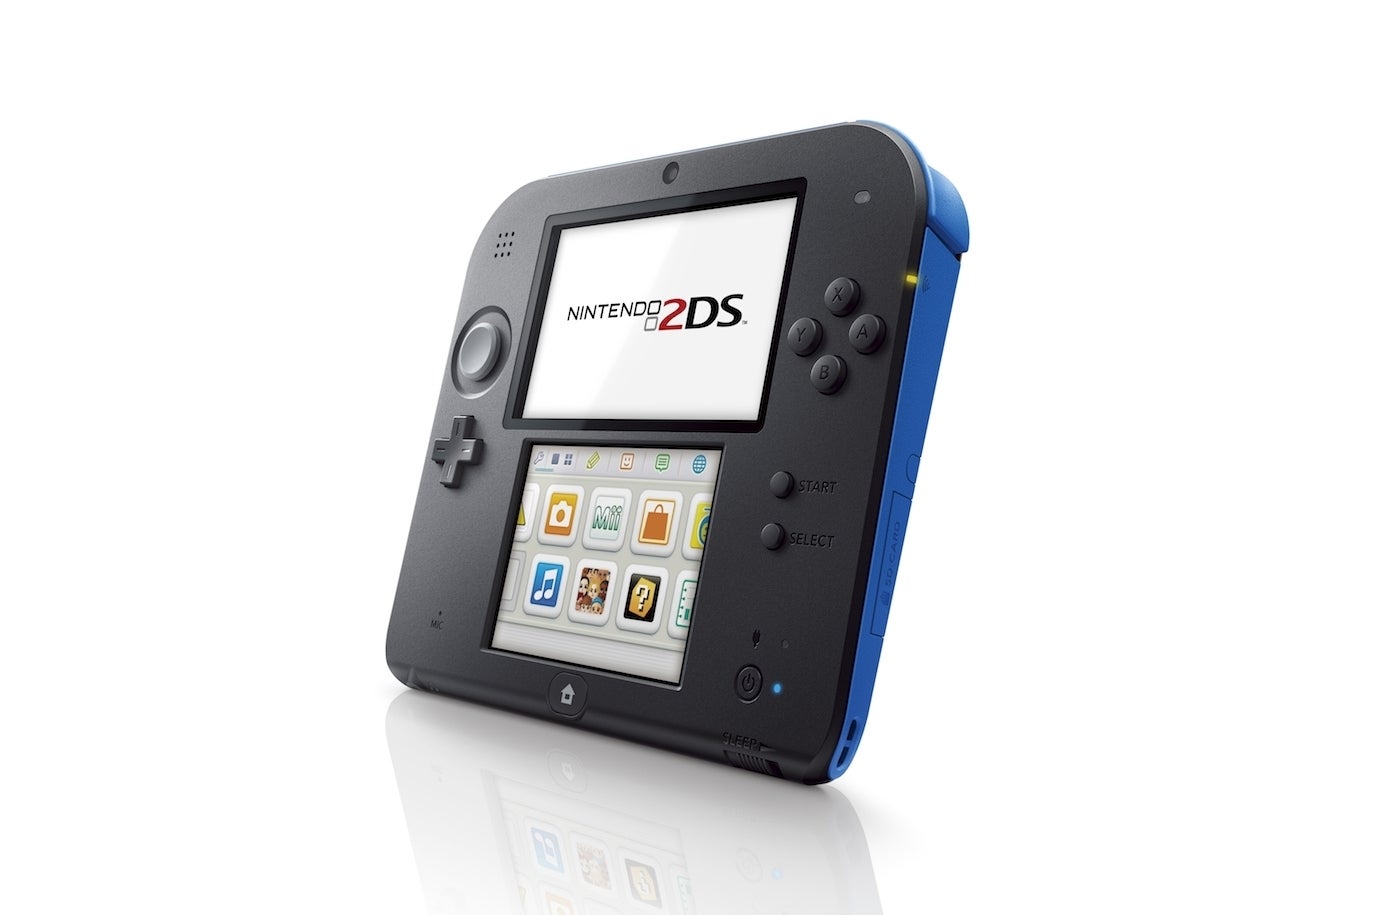 Image for Nintendo cuts Wii U by $50, announces 2DS handheld